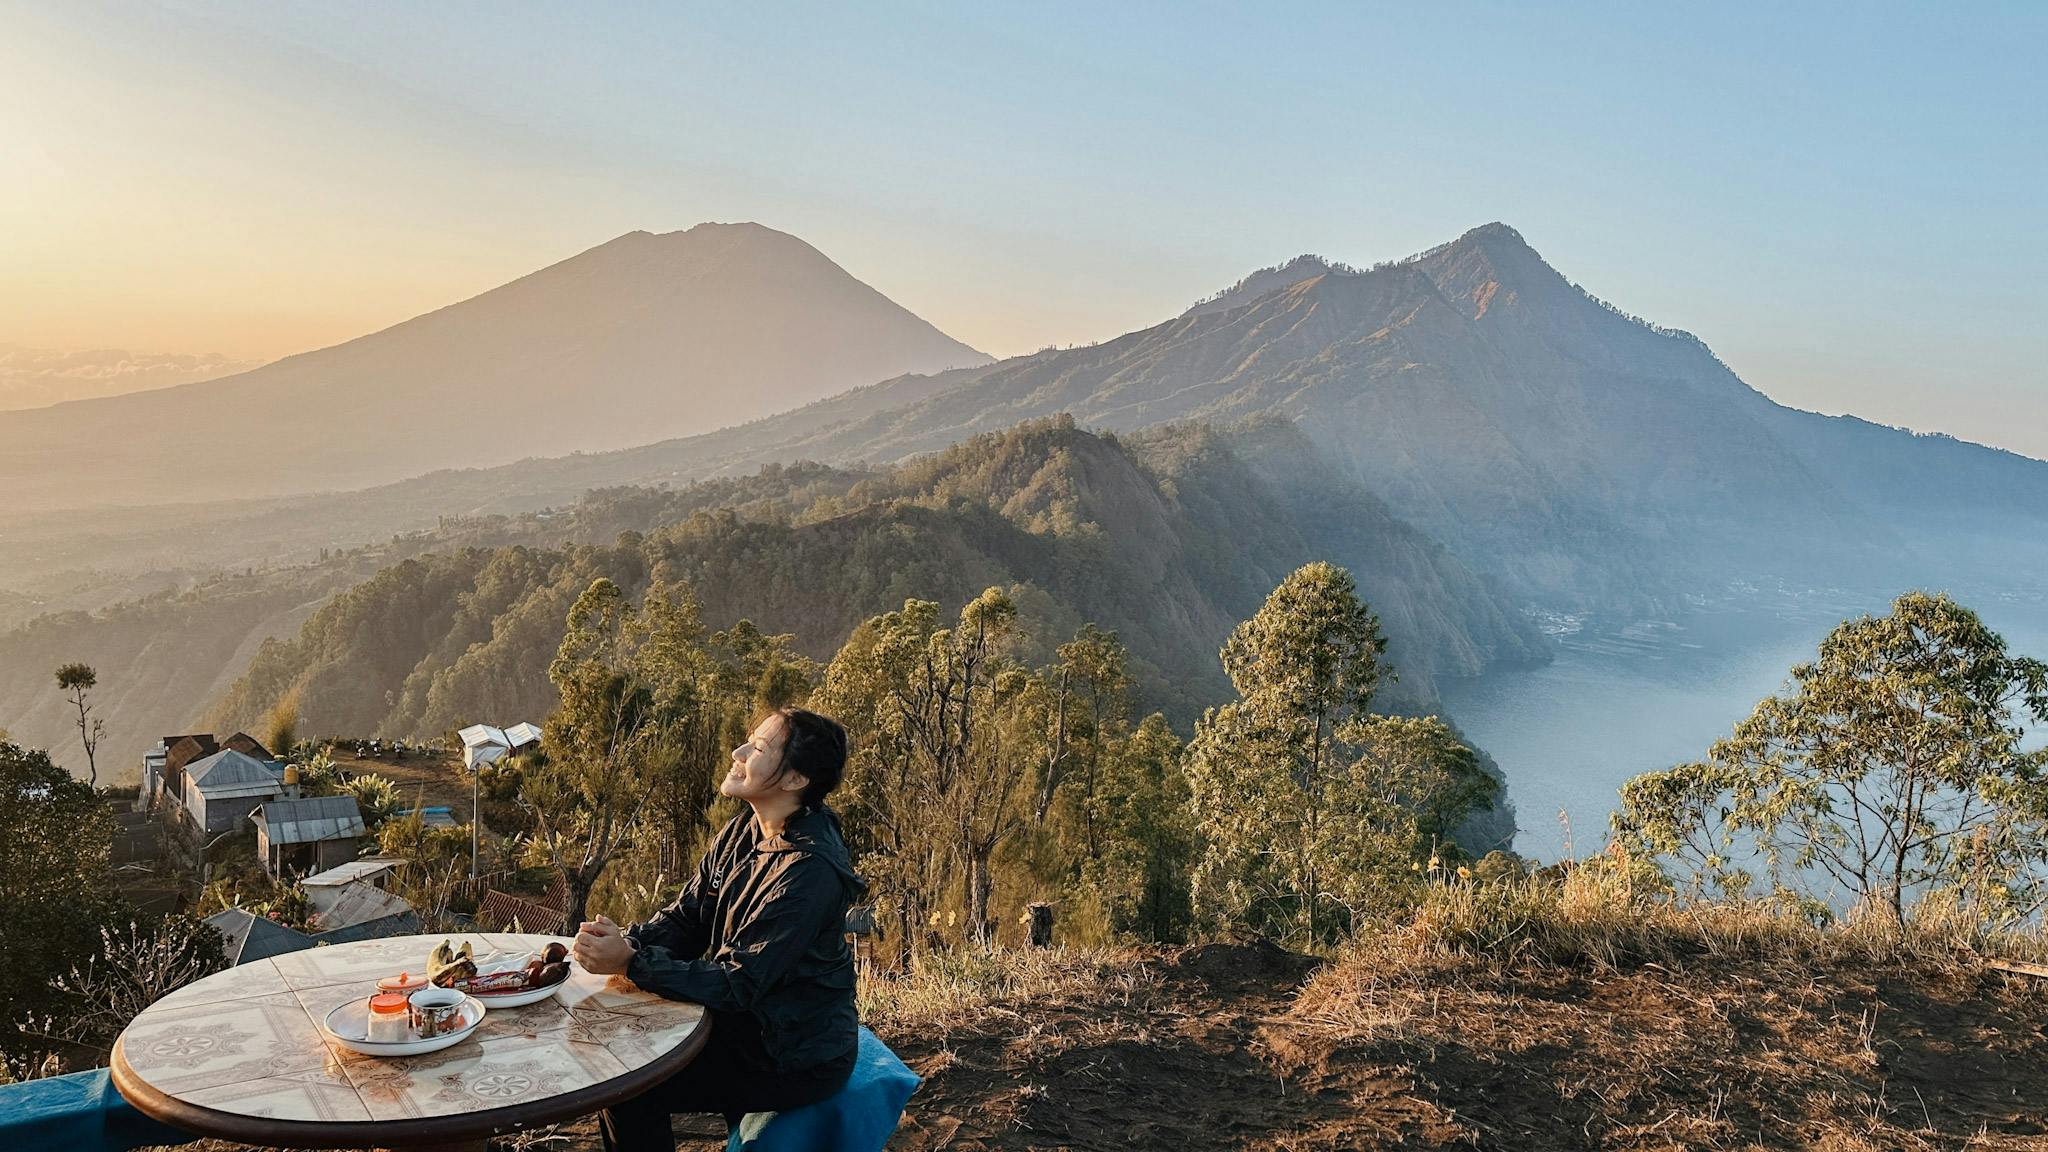 Enjoy breakfast at Batur volcano, with a fraction of the crowds.